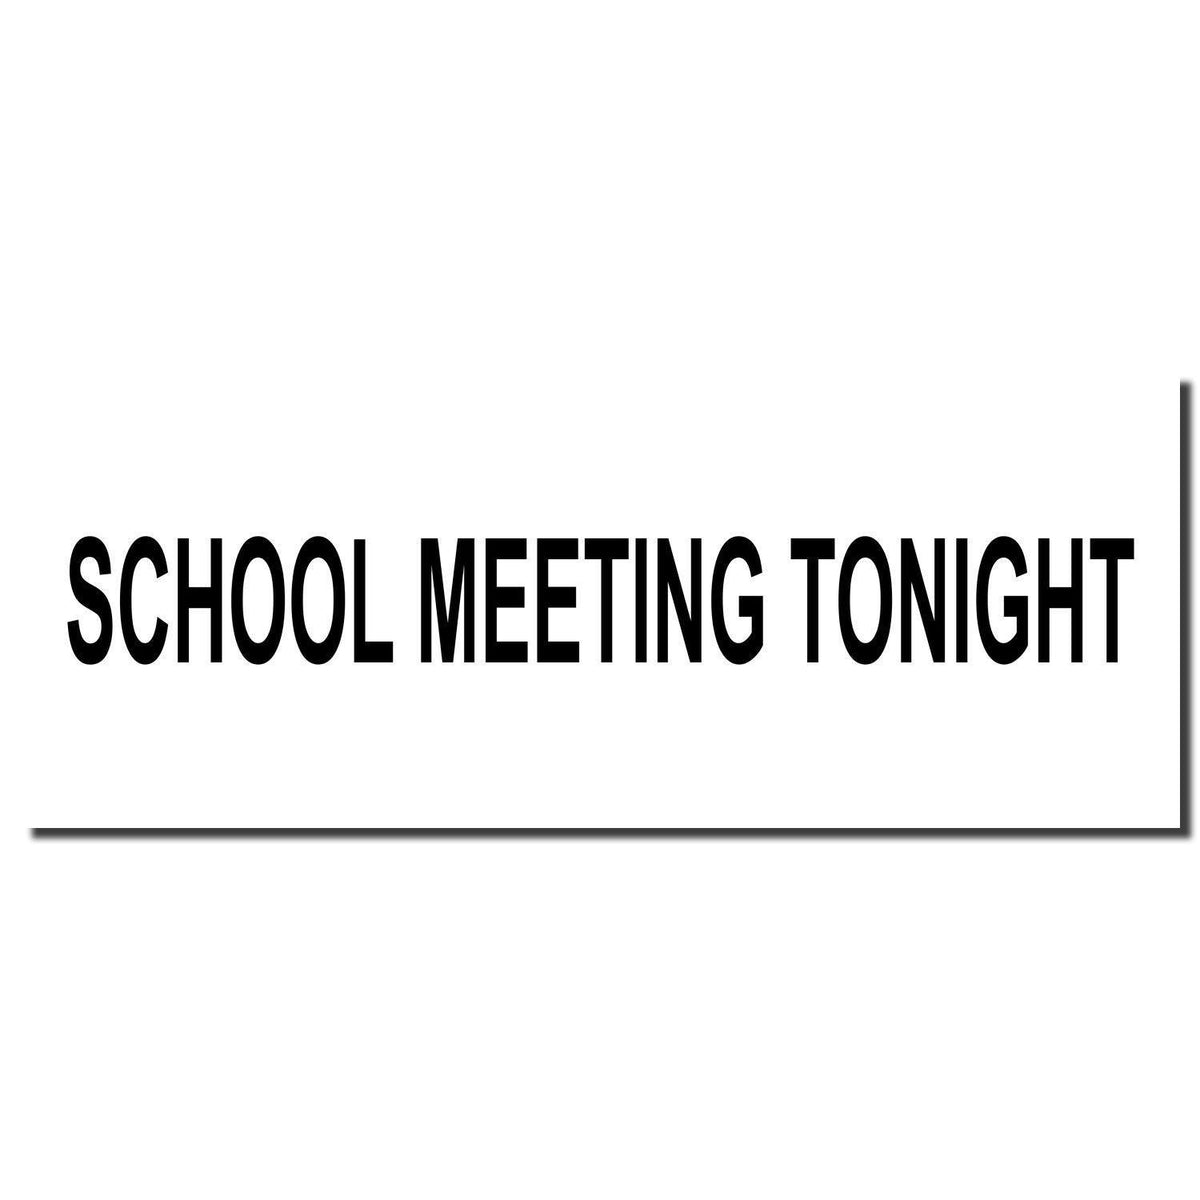 Self Inking School Meeting Tonight Stamp - Engineer Seal Stamps - Brand_Trodat, Impression Size_Small, Stamp Type_Self-Inking Stamp, Type of Use_Teacher